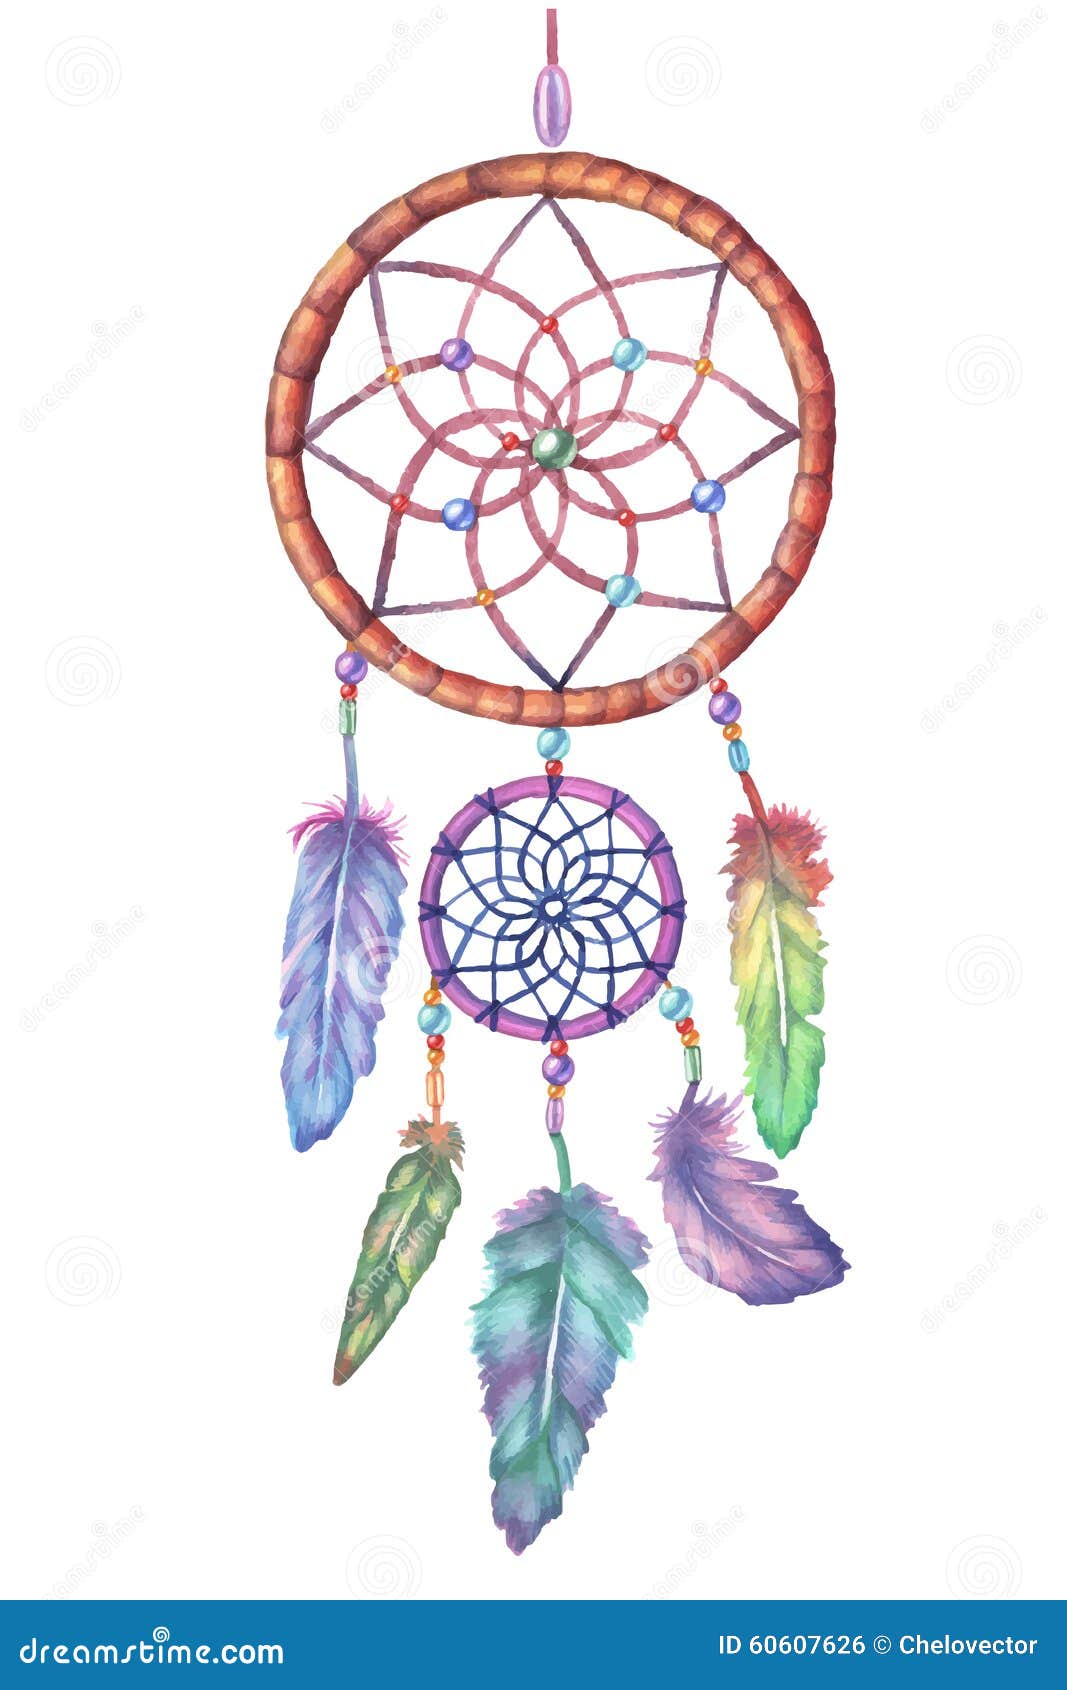 Dream Catcher - Traditional Long BLACK Dream Catcher With Feathers And  Colorful Beads LARGE SIZE, 33